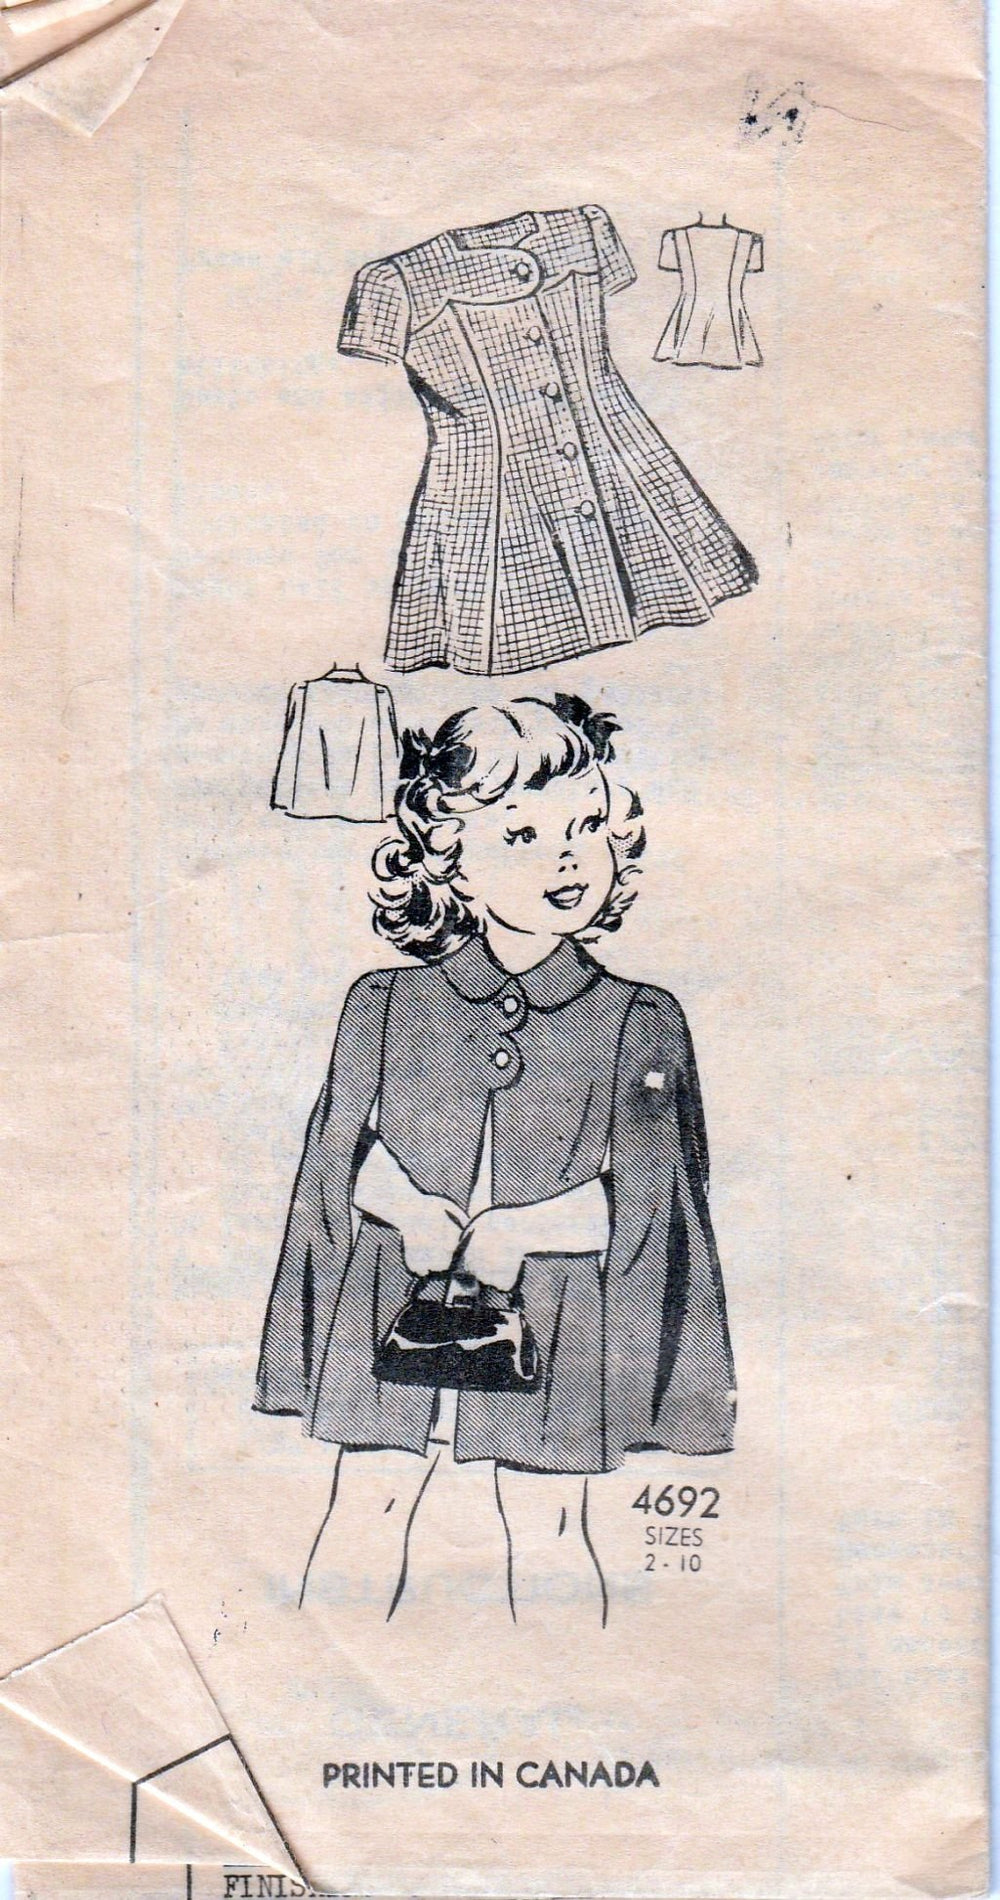 Mail Order 4692 Vintage 1940's Sewing Pattern Little Girls Dress Cape - VintageStitching - Vintage Sewing Patterns